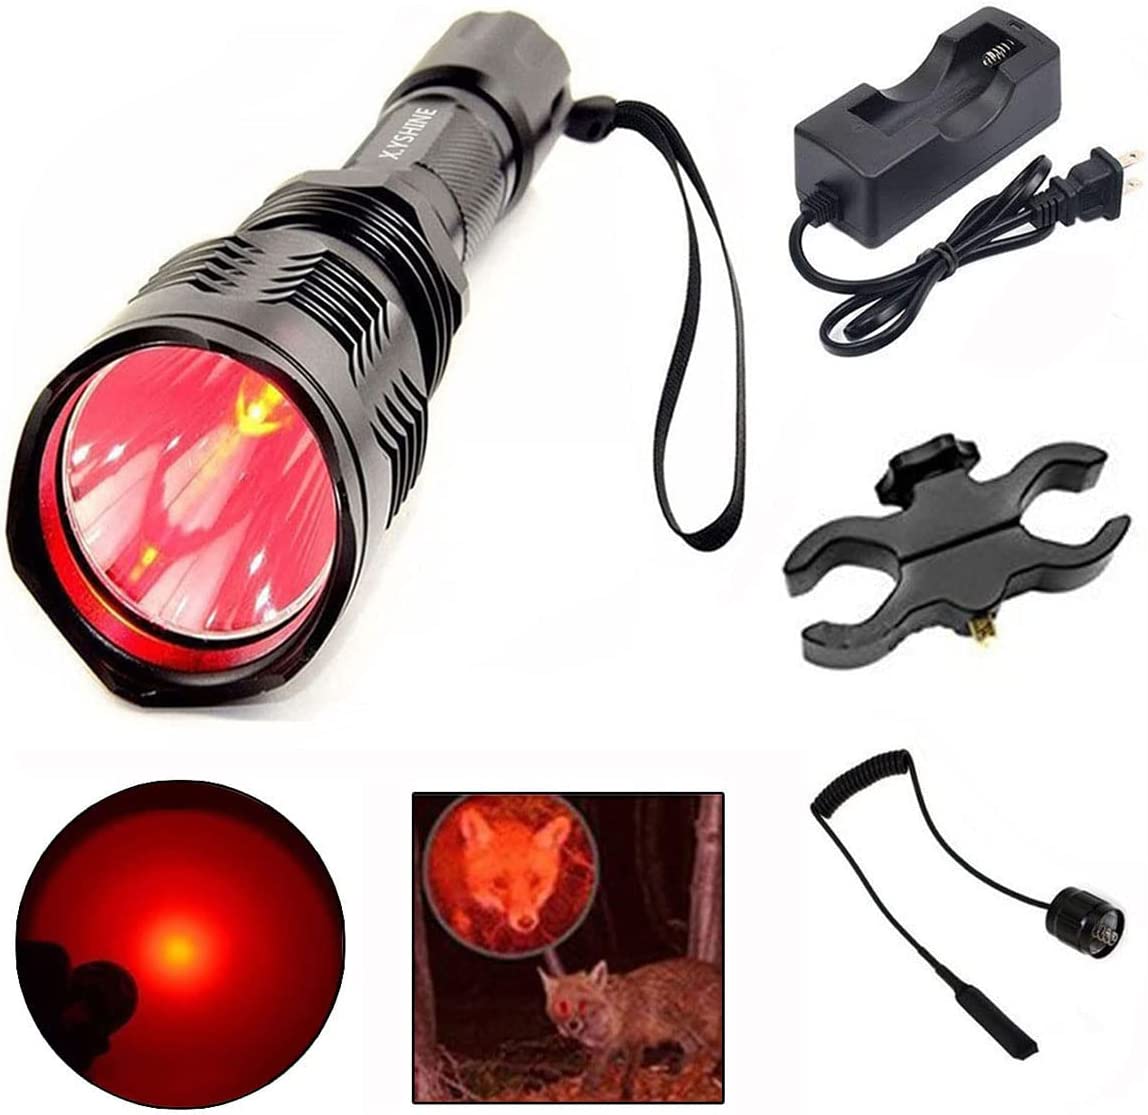 X.YSHINE LED Hunting Flashlight, HS-802 250 Yards Cree Coyote Hog Red Light Flashlight with Remote Tactical Pressure Switch+ Barrel Mount+ Battery(not Sold Individually)+ Charger for Hunting, Fishing